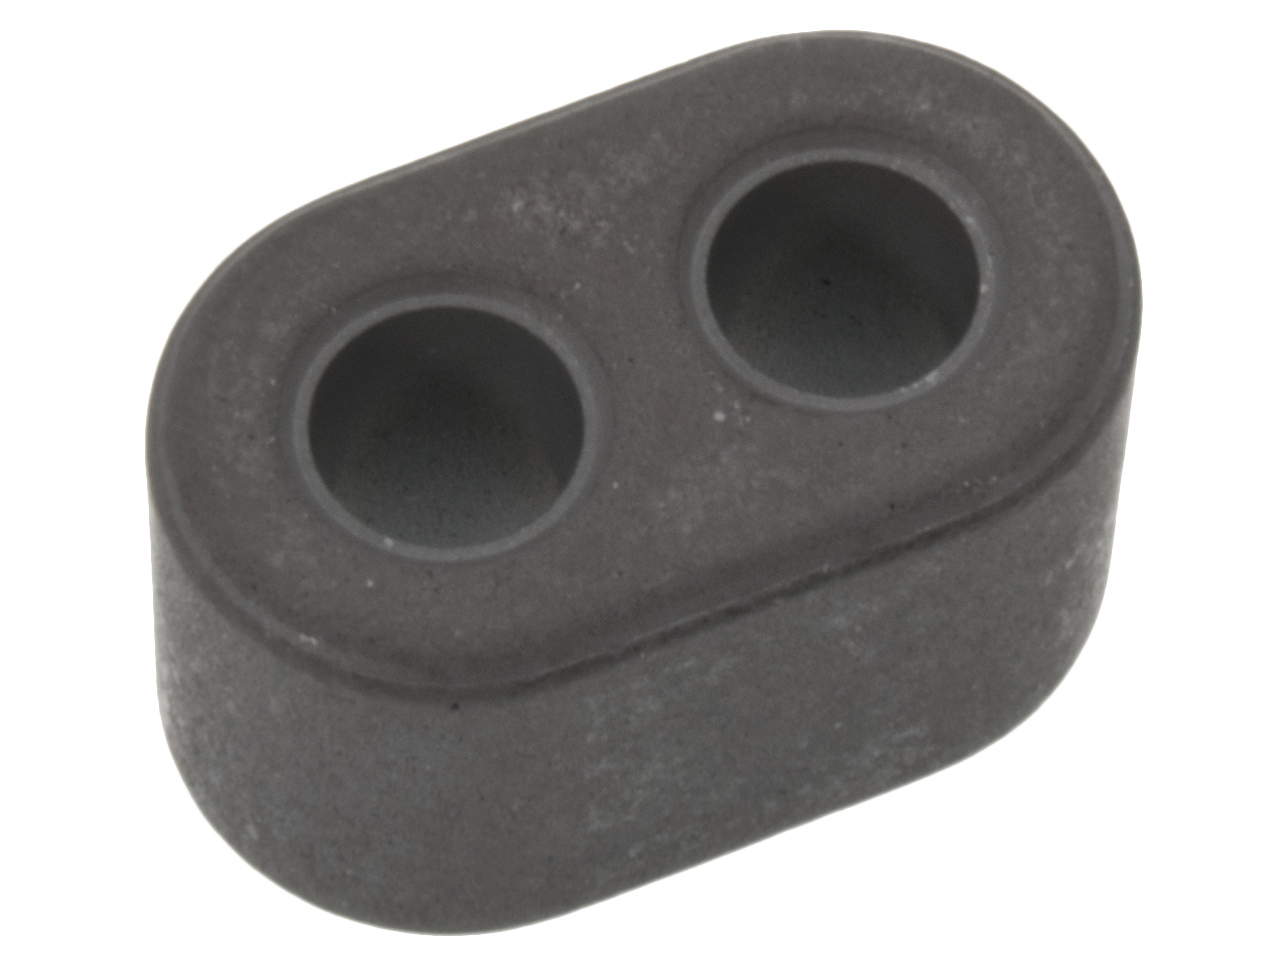 Ferrite core with dual apertures K1 8.5 x 14.5 x 8.3mm @ electrokit (1 of 1)